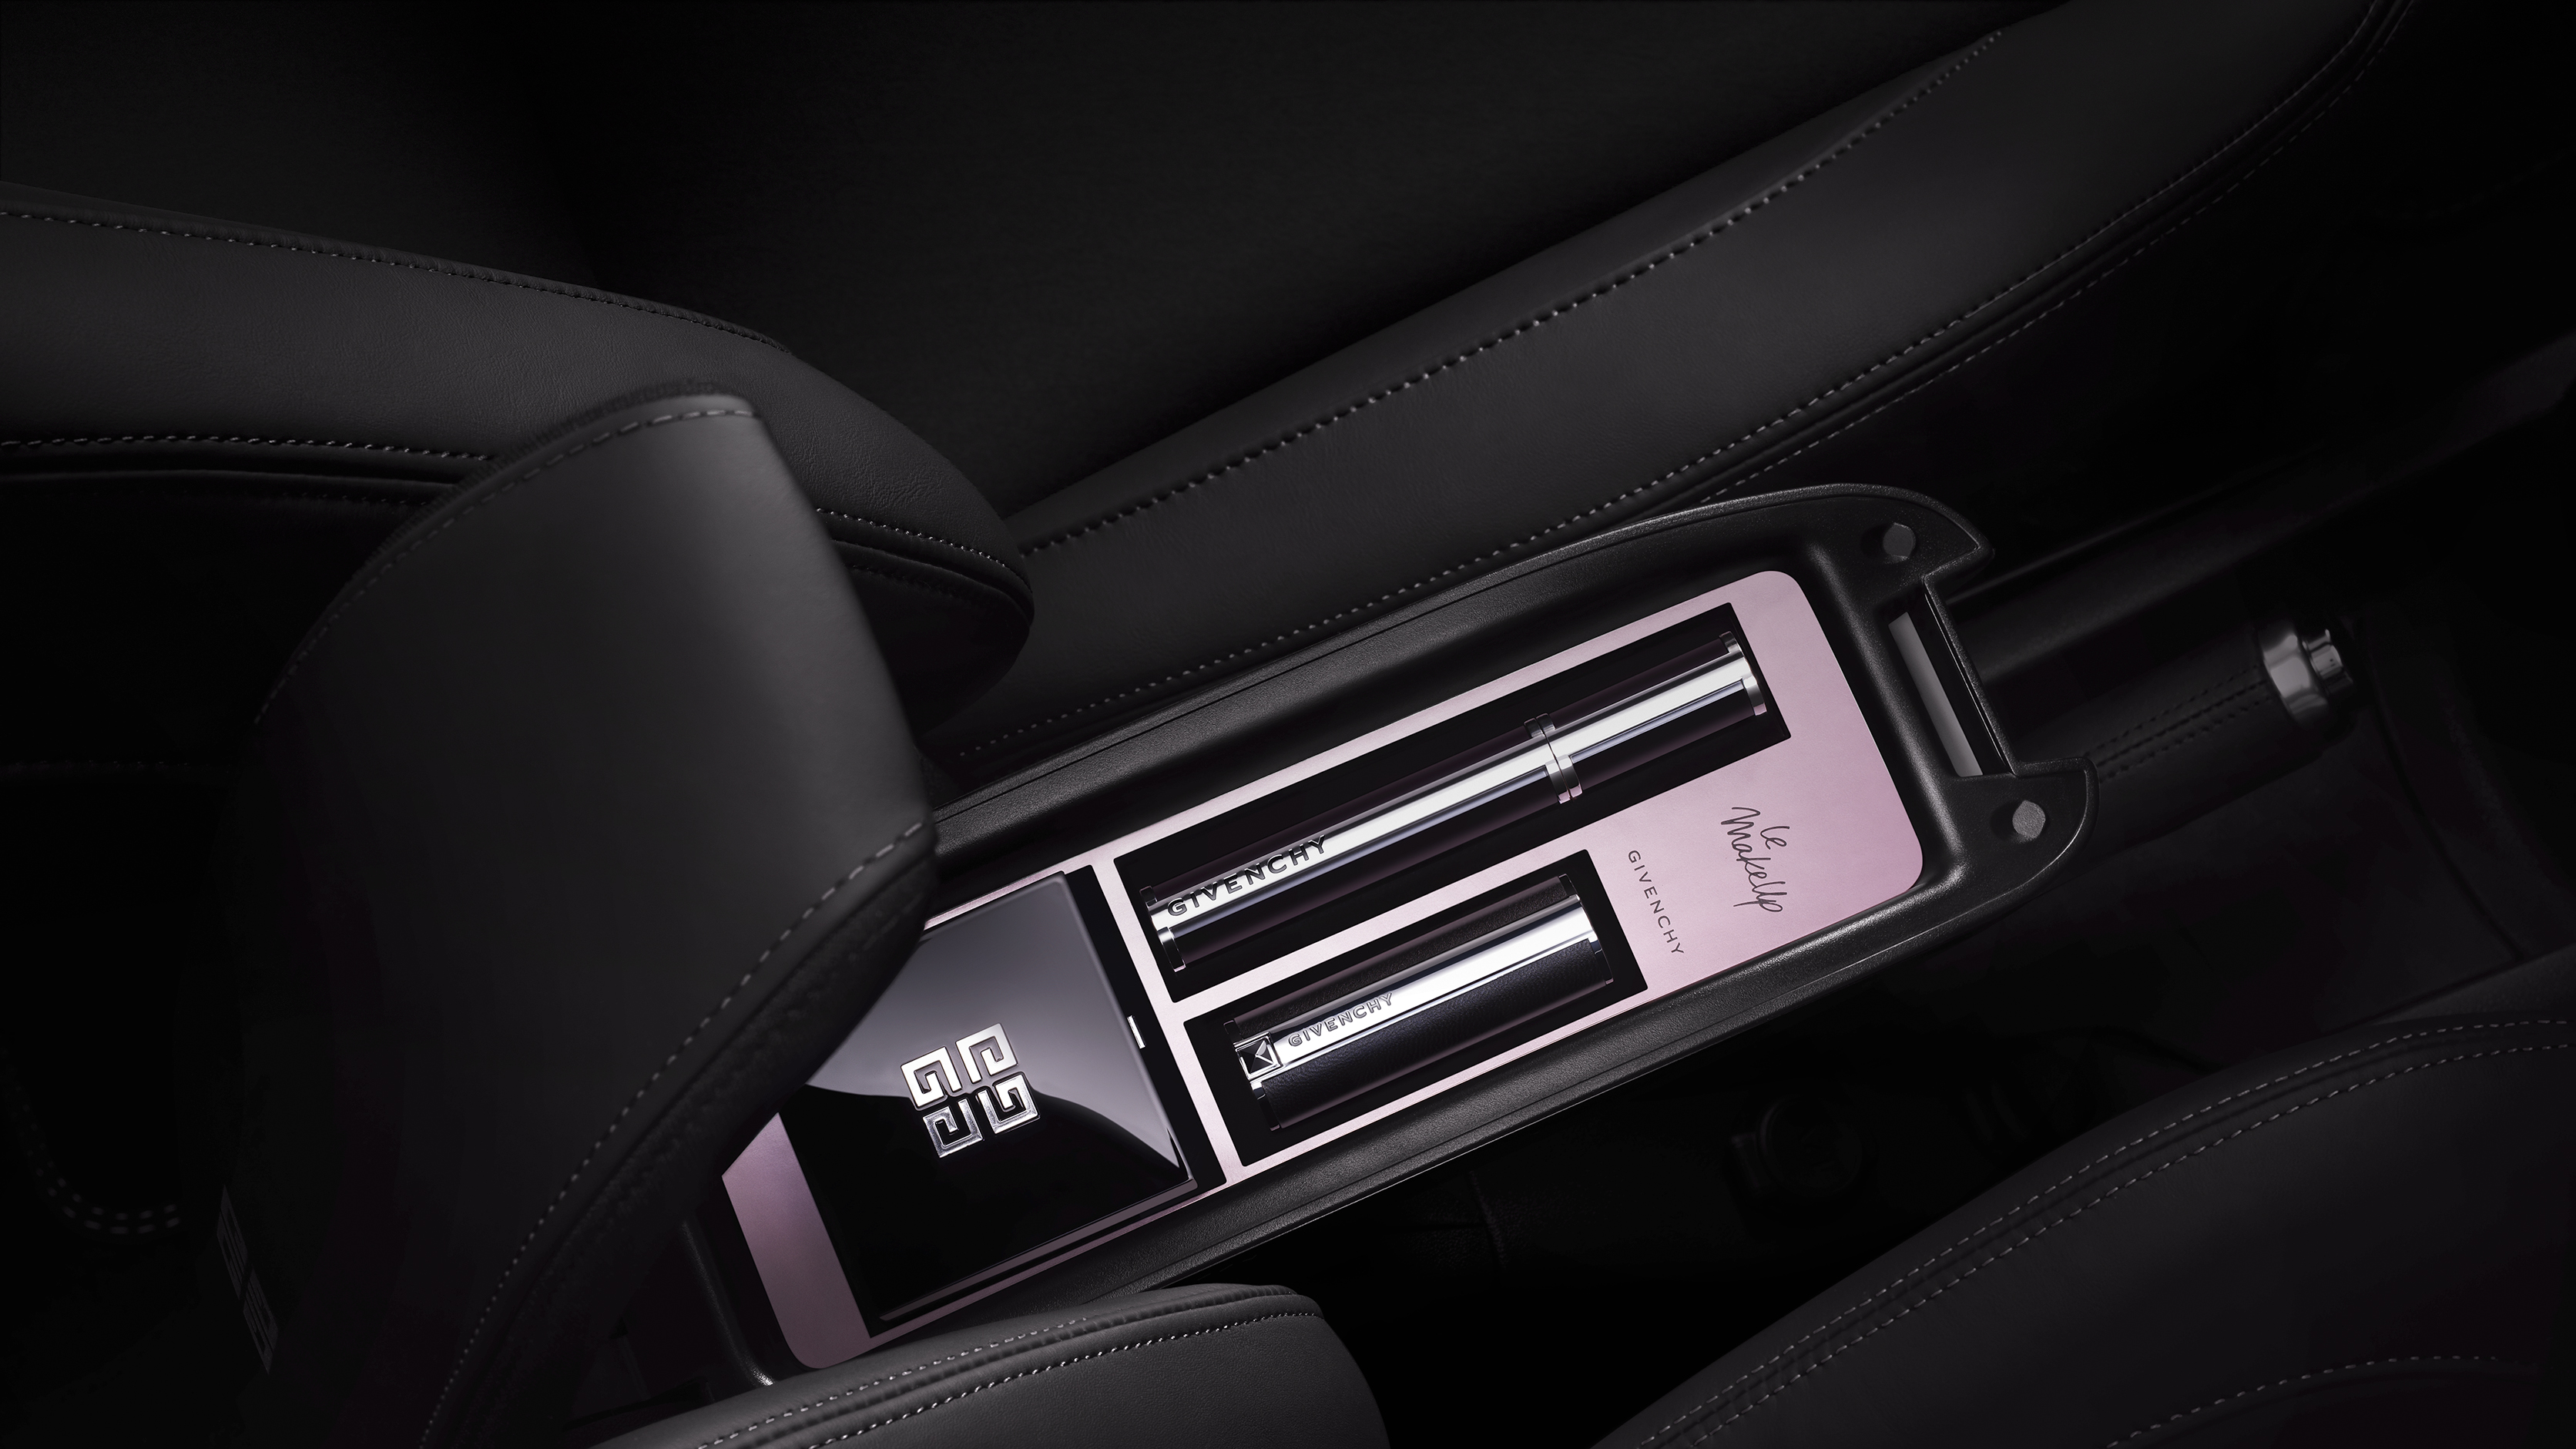 Givenchy teams up with DS Automobiles on MakeUp car
